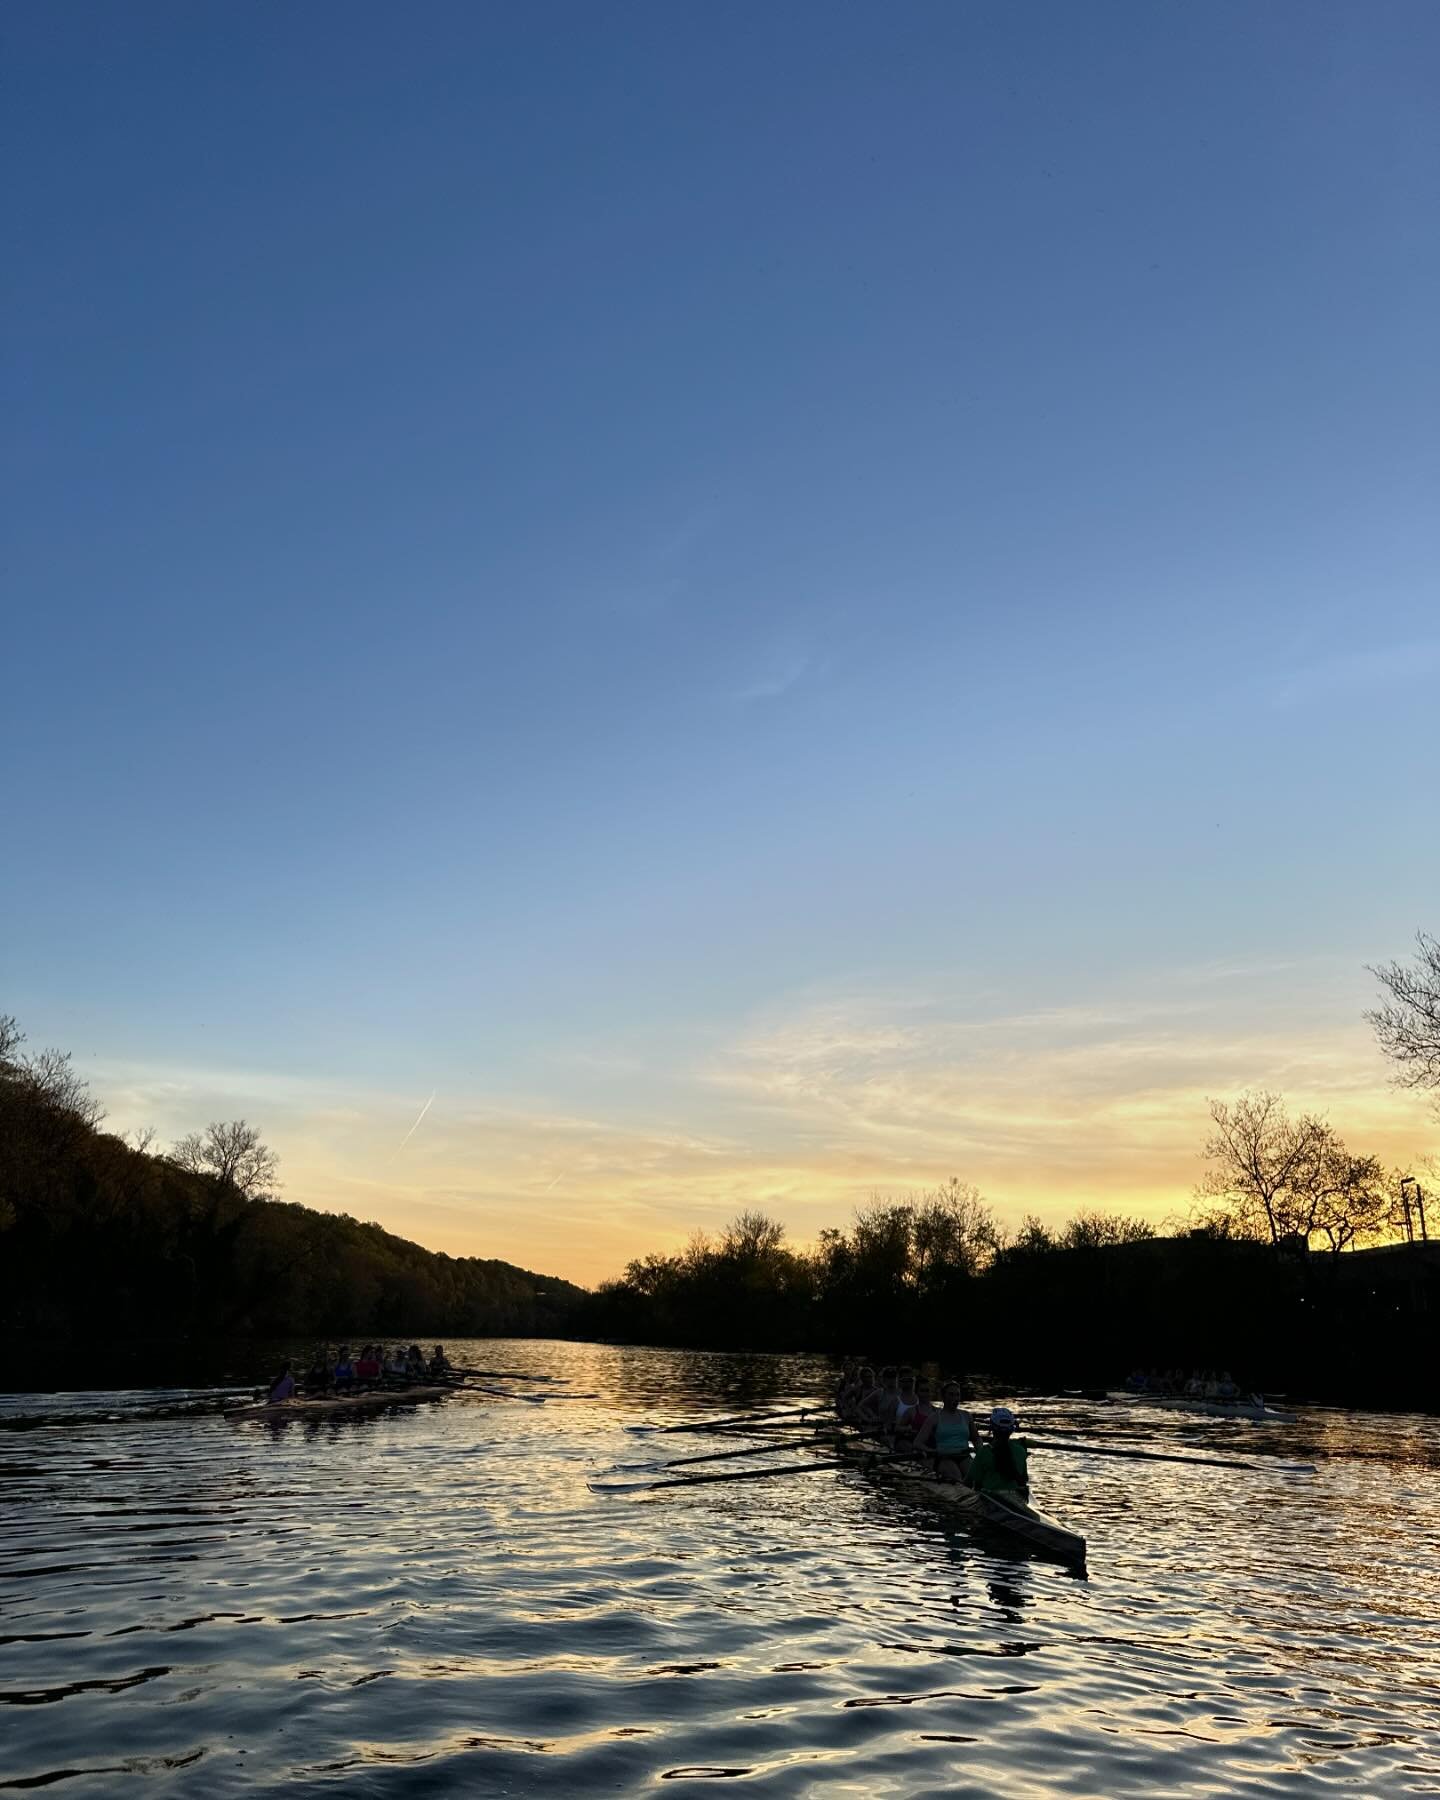 Massive shoutout to @msjacrew for letting me hop in the launch for an amazing evening row!

So much respect for this team and their coaching staff, and I can&rsquo;t wait to watch them continue to crush it this spring!

Keep up the incredible work, a